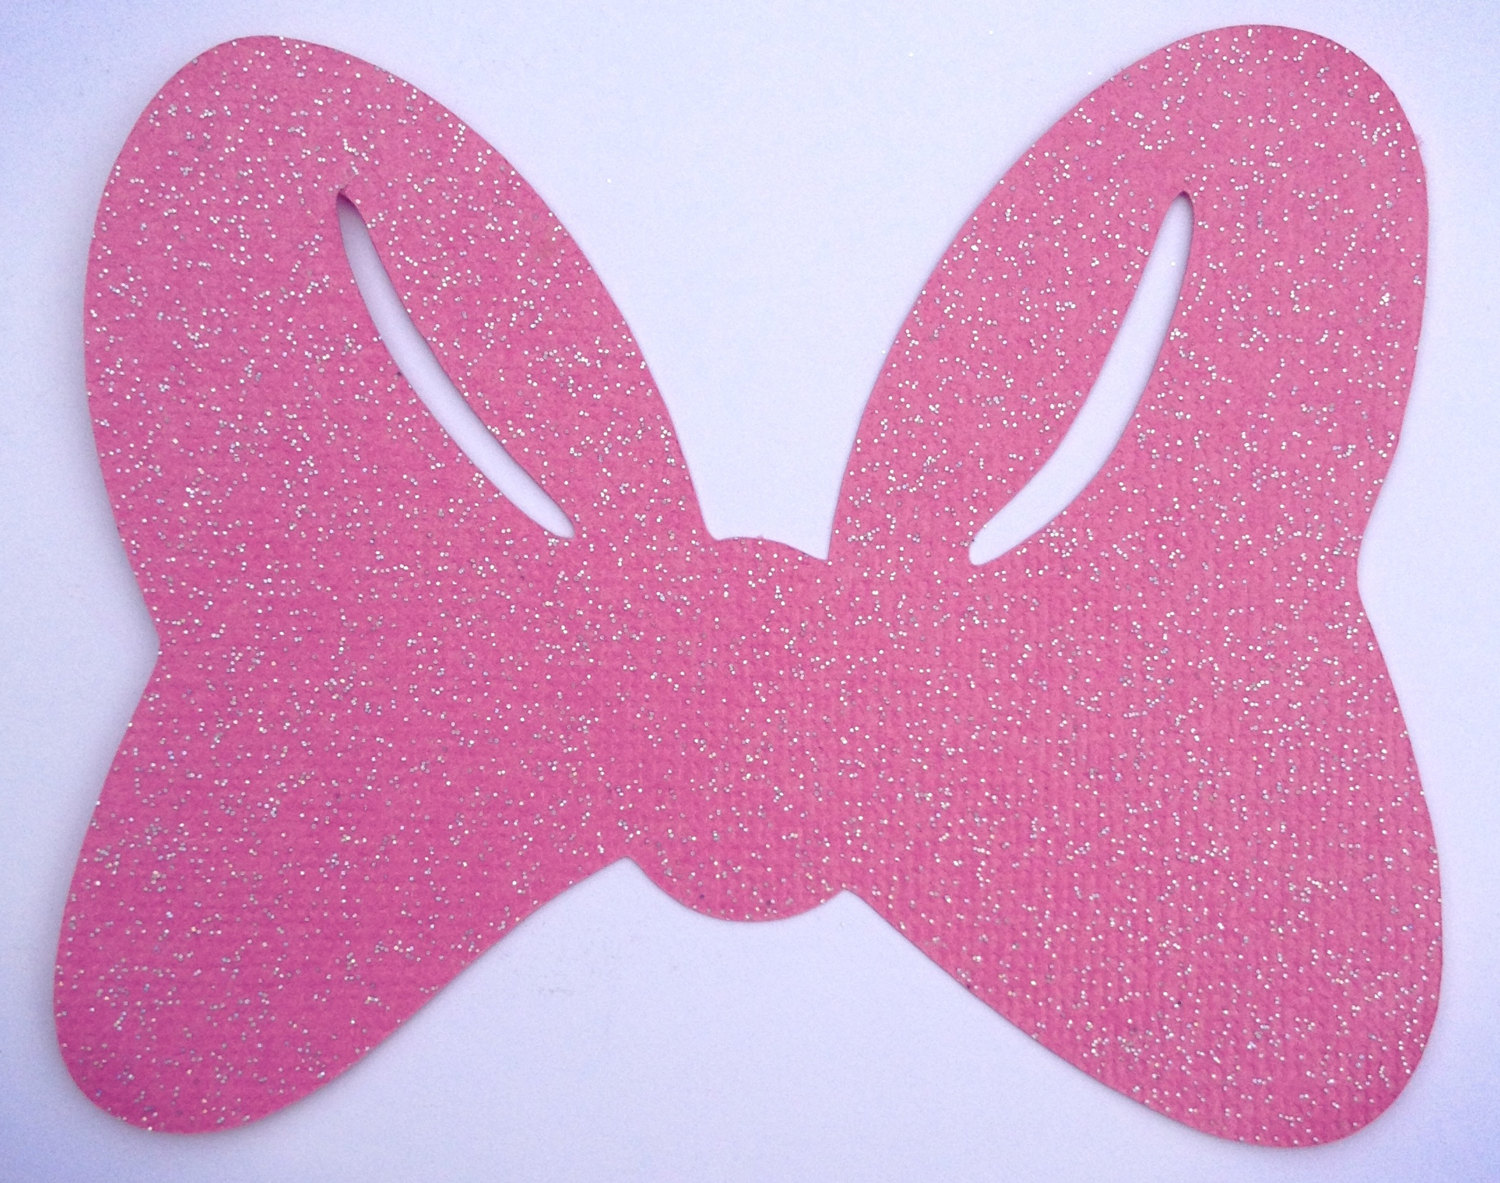 30 Pink Glitter Minnie Mouse Bows By Lulubellacreations On Etsy